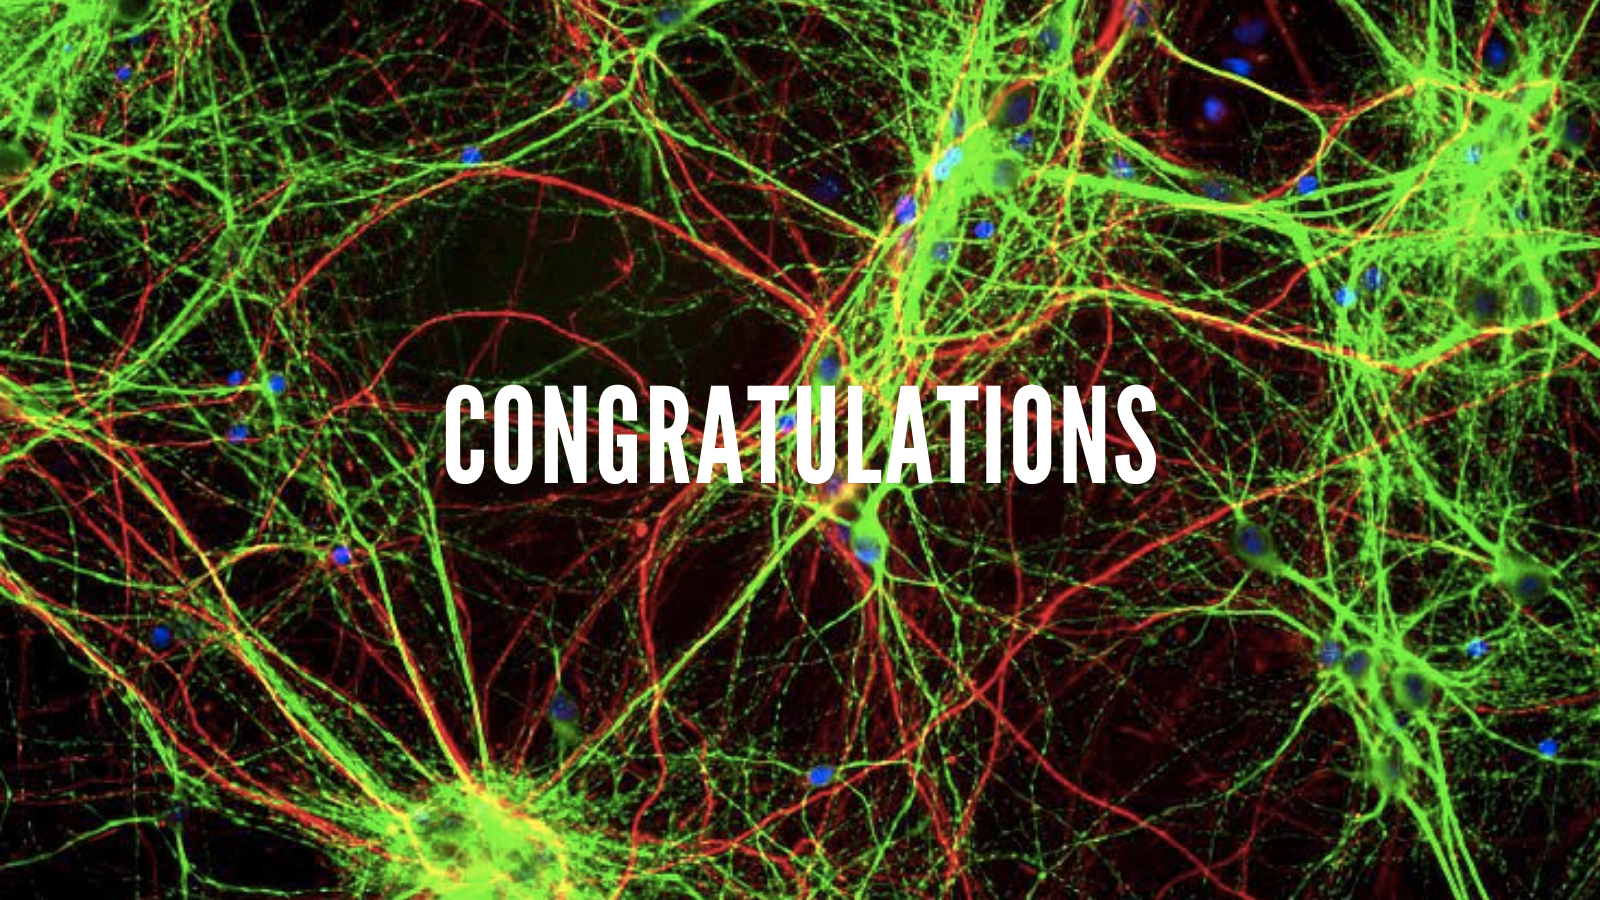 Image of green and red rat brain cells with the word "congratulations" in the centre in white text.